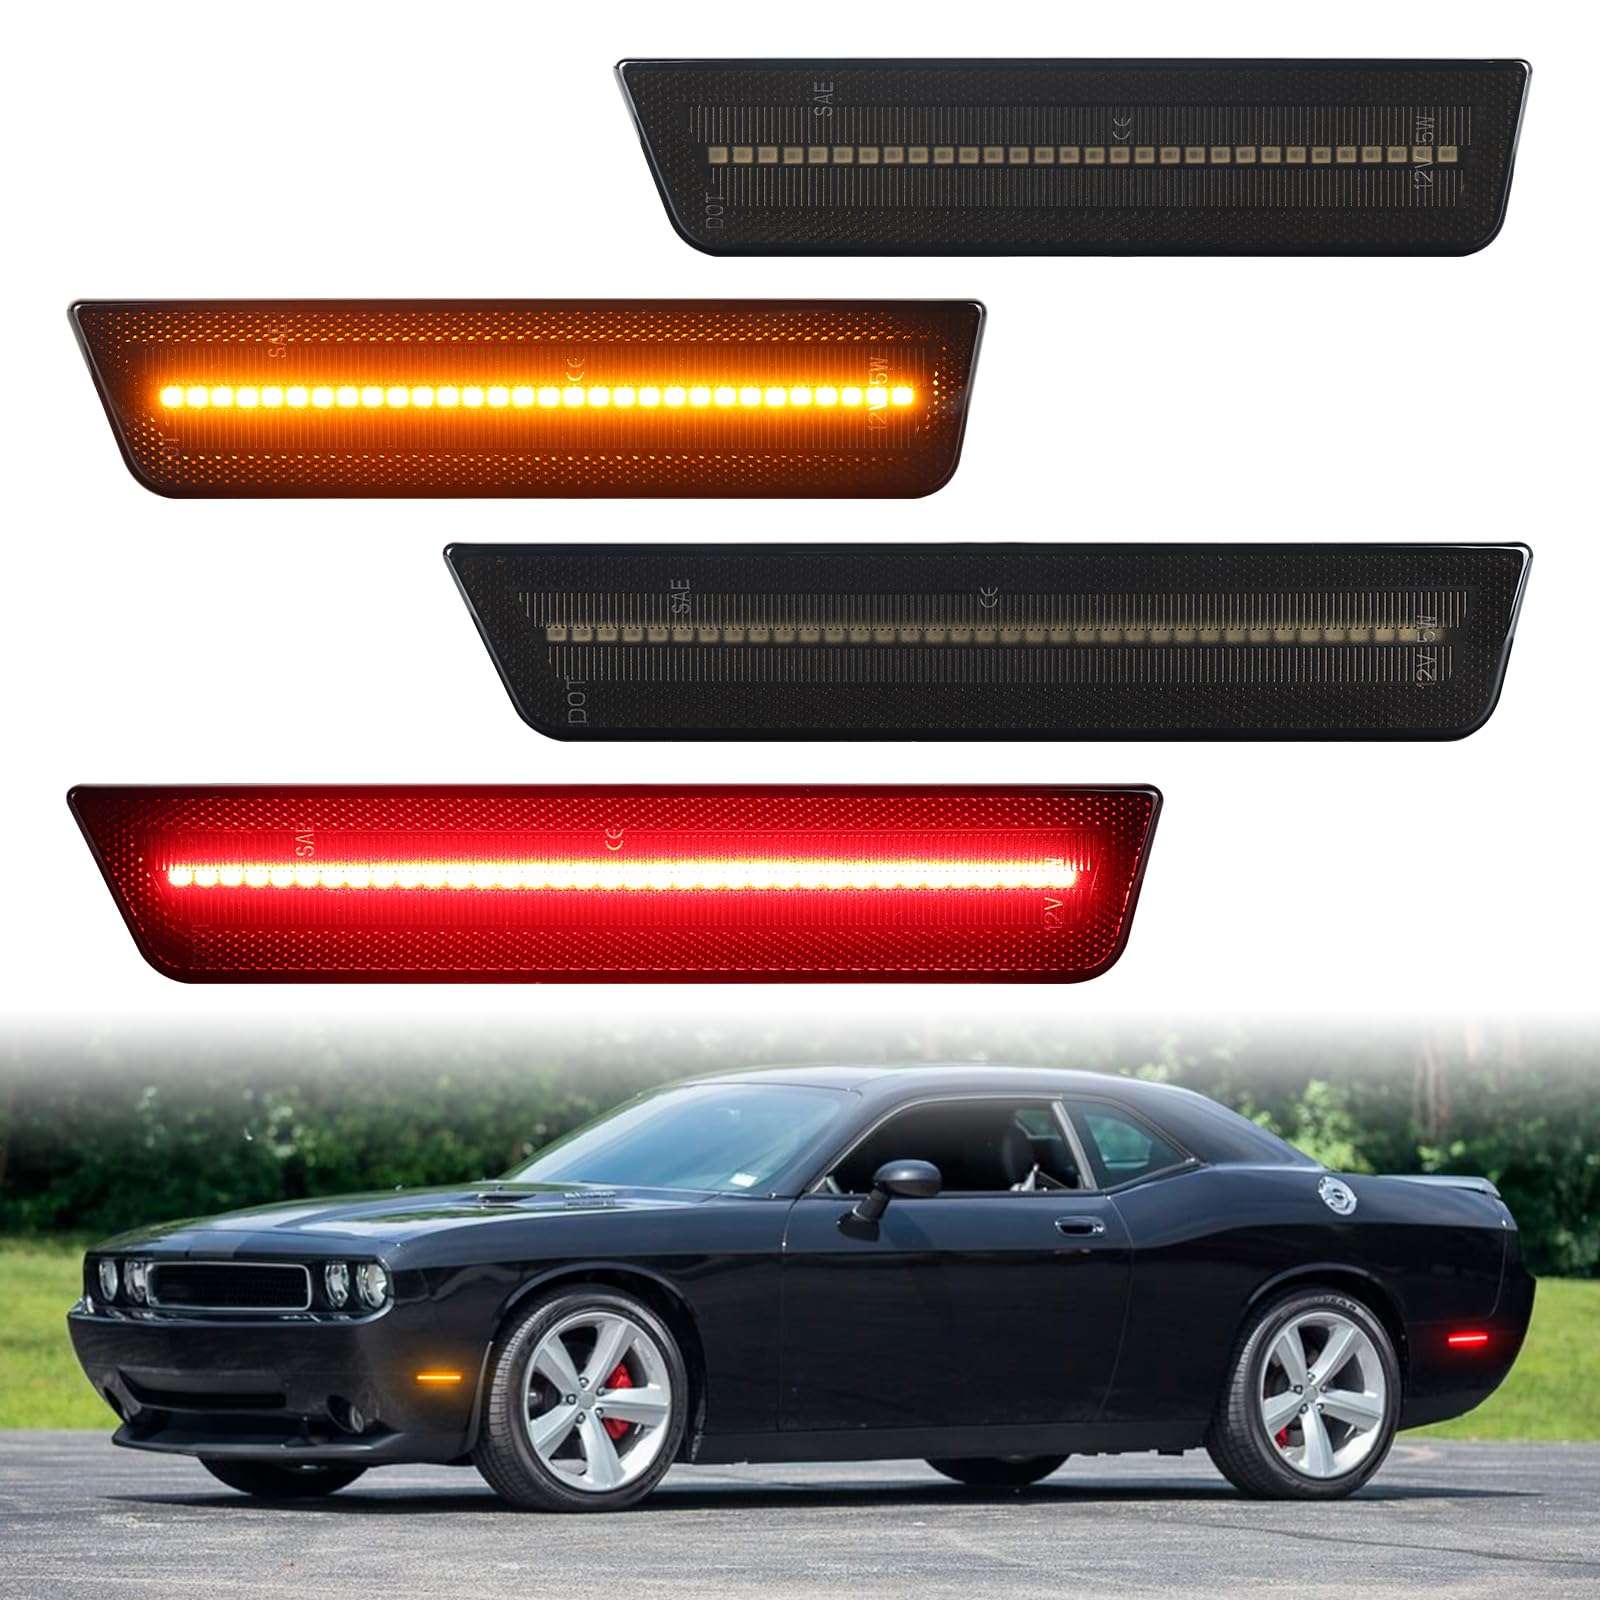 FetonAuto Smoked Lens LED Side Marker Lights for Dodge Challenger 2008-2014 for Dodge Charger 2011-2014, Amber Red Front Rear Bumper Turn Signal Reflector Lamps von FetonAuto